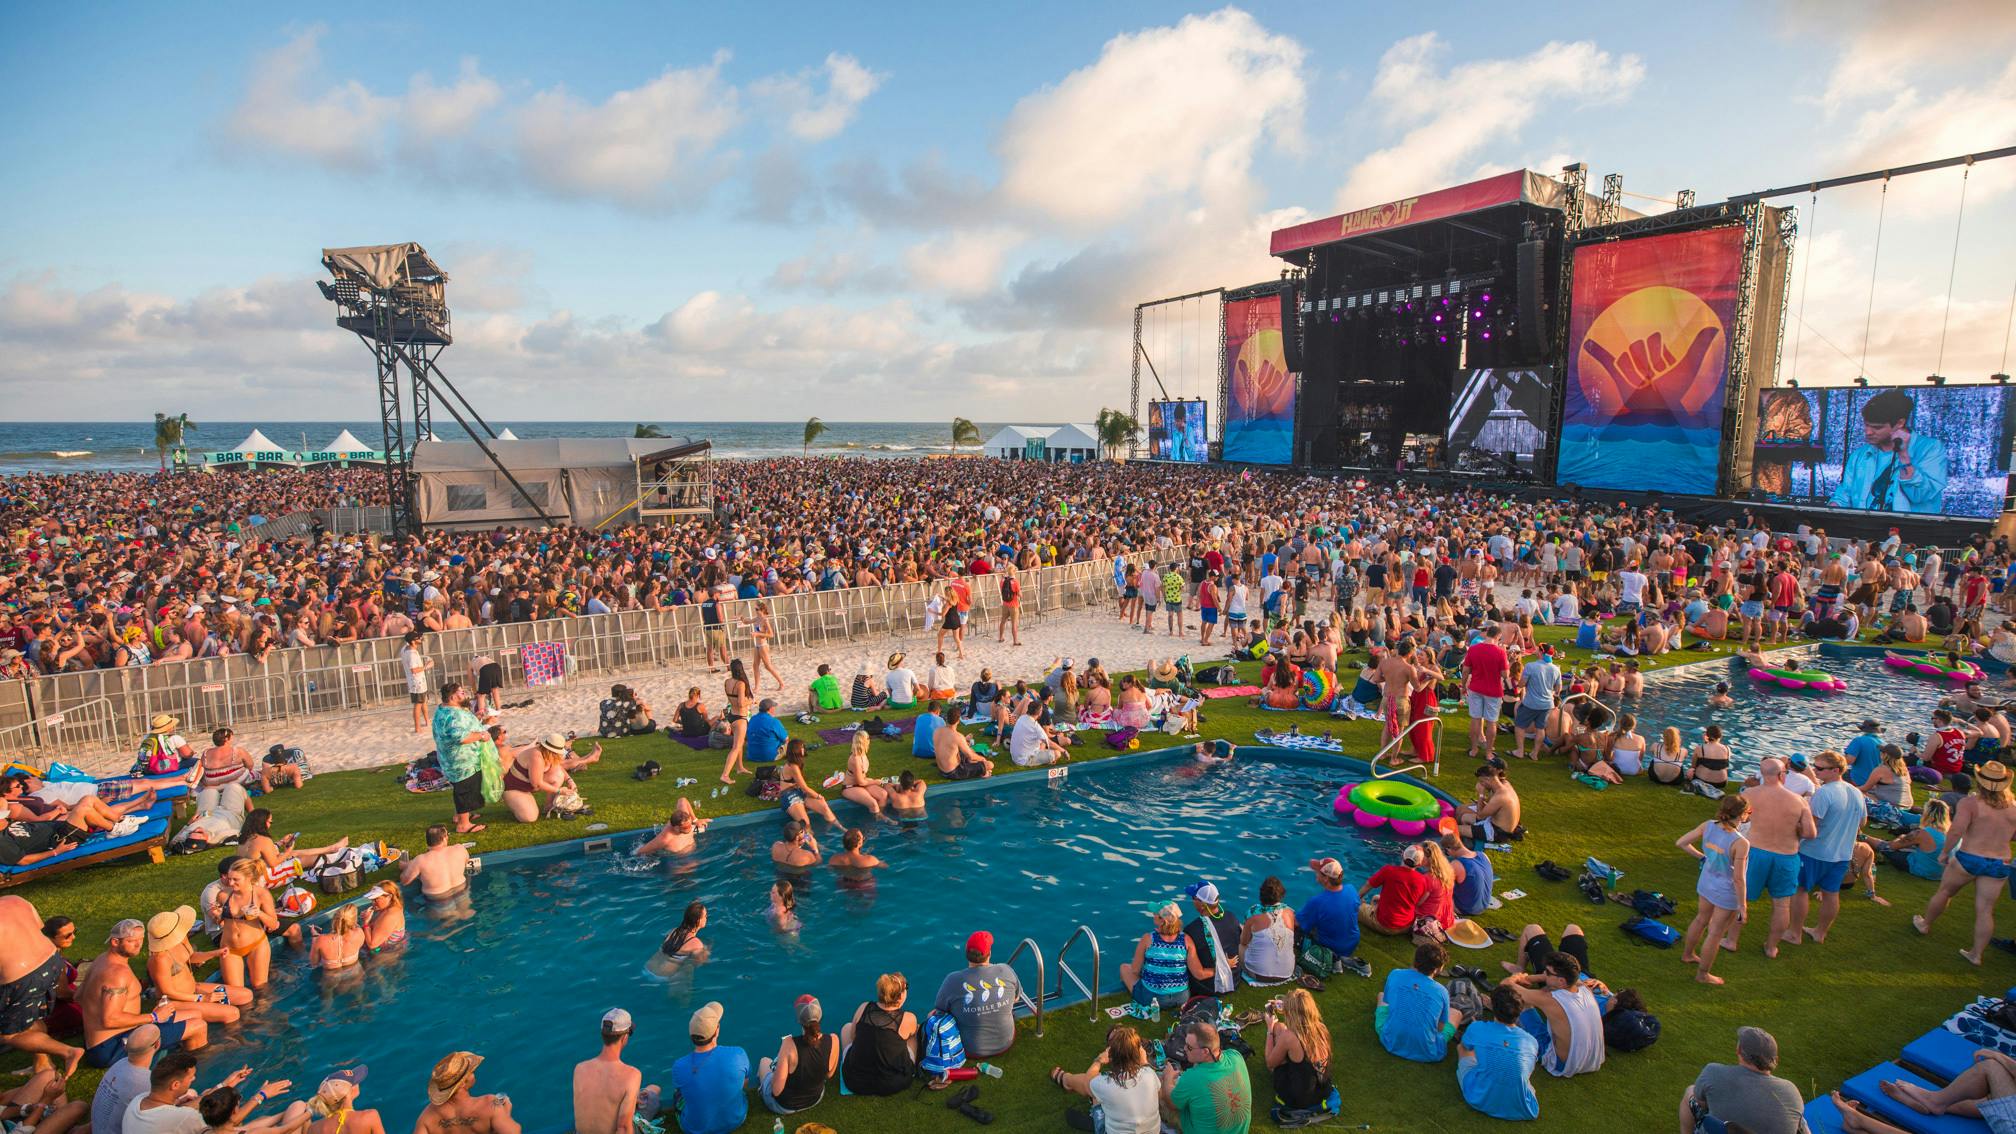 Fall Out Boy, Halsey, Post Malone and more for Hangout Fest 2022